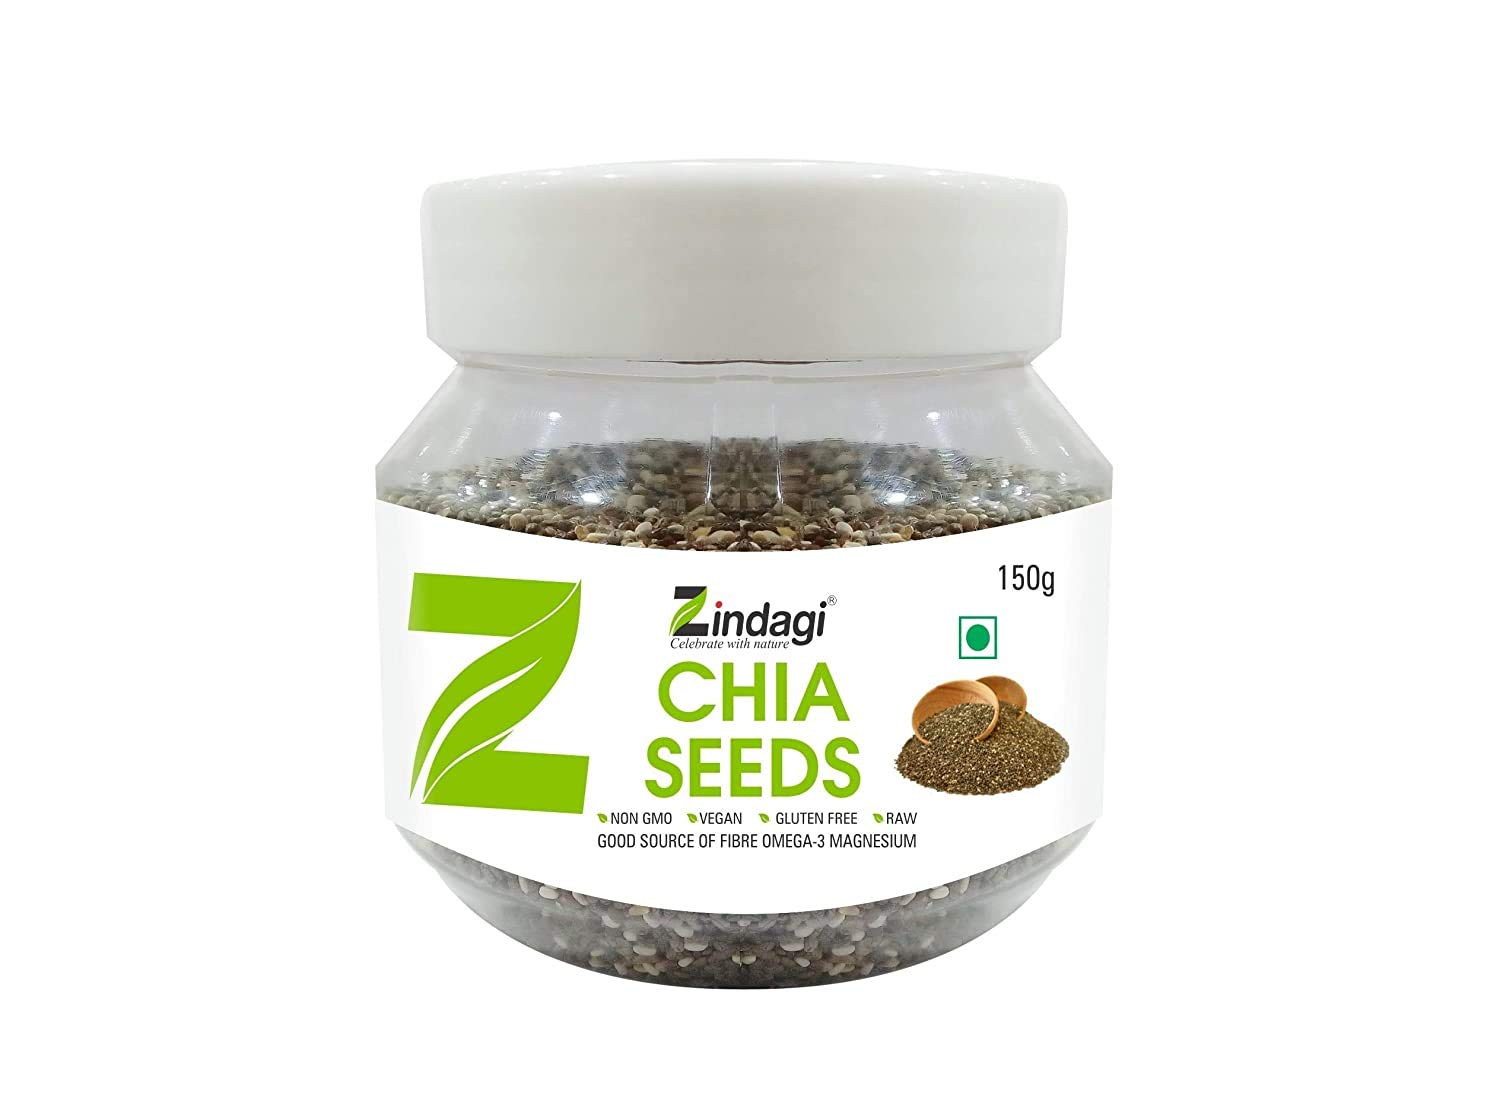 Buy Zindagi Chia Seeds For Weight Lose - Natural Black & White Chia Seeds With High Quality Protein 300 gm at Best Price Online